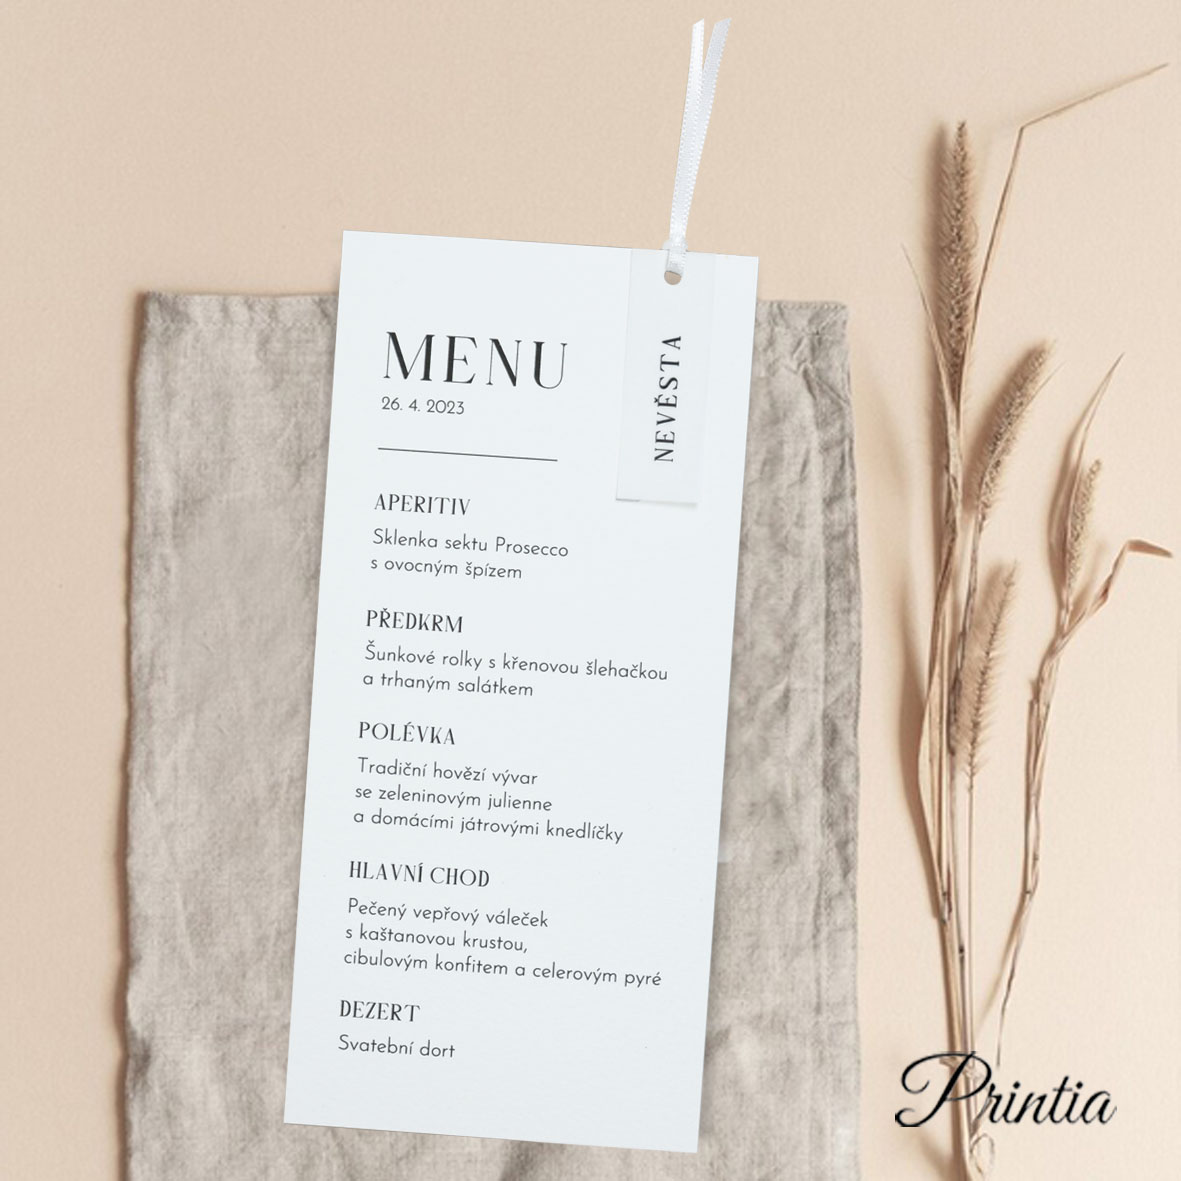 Wedding menu with name card tied up by a ribbon